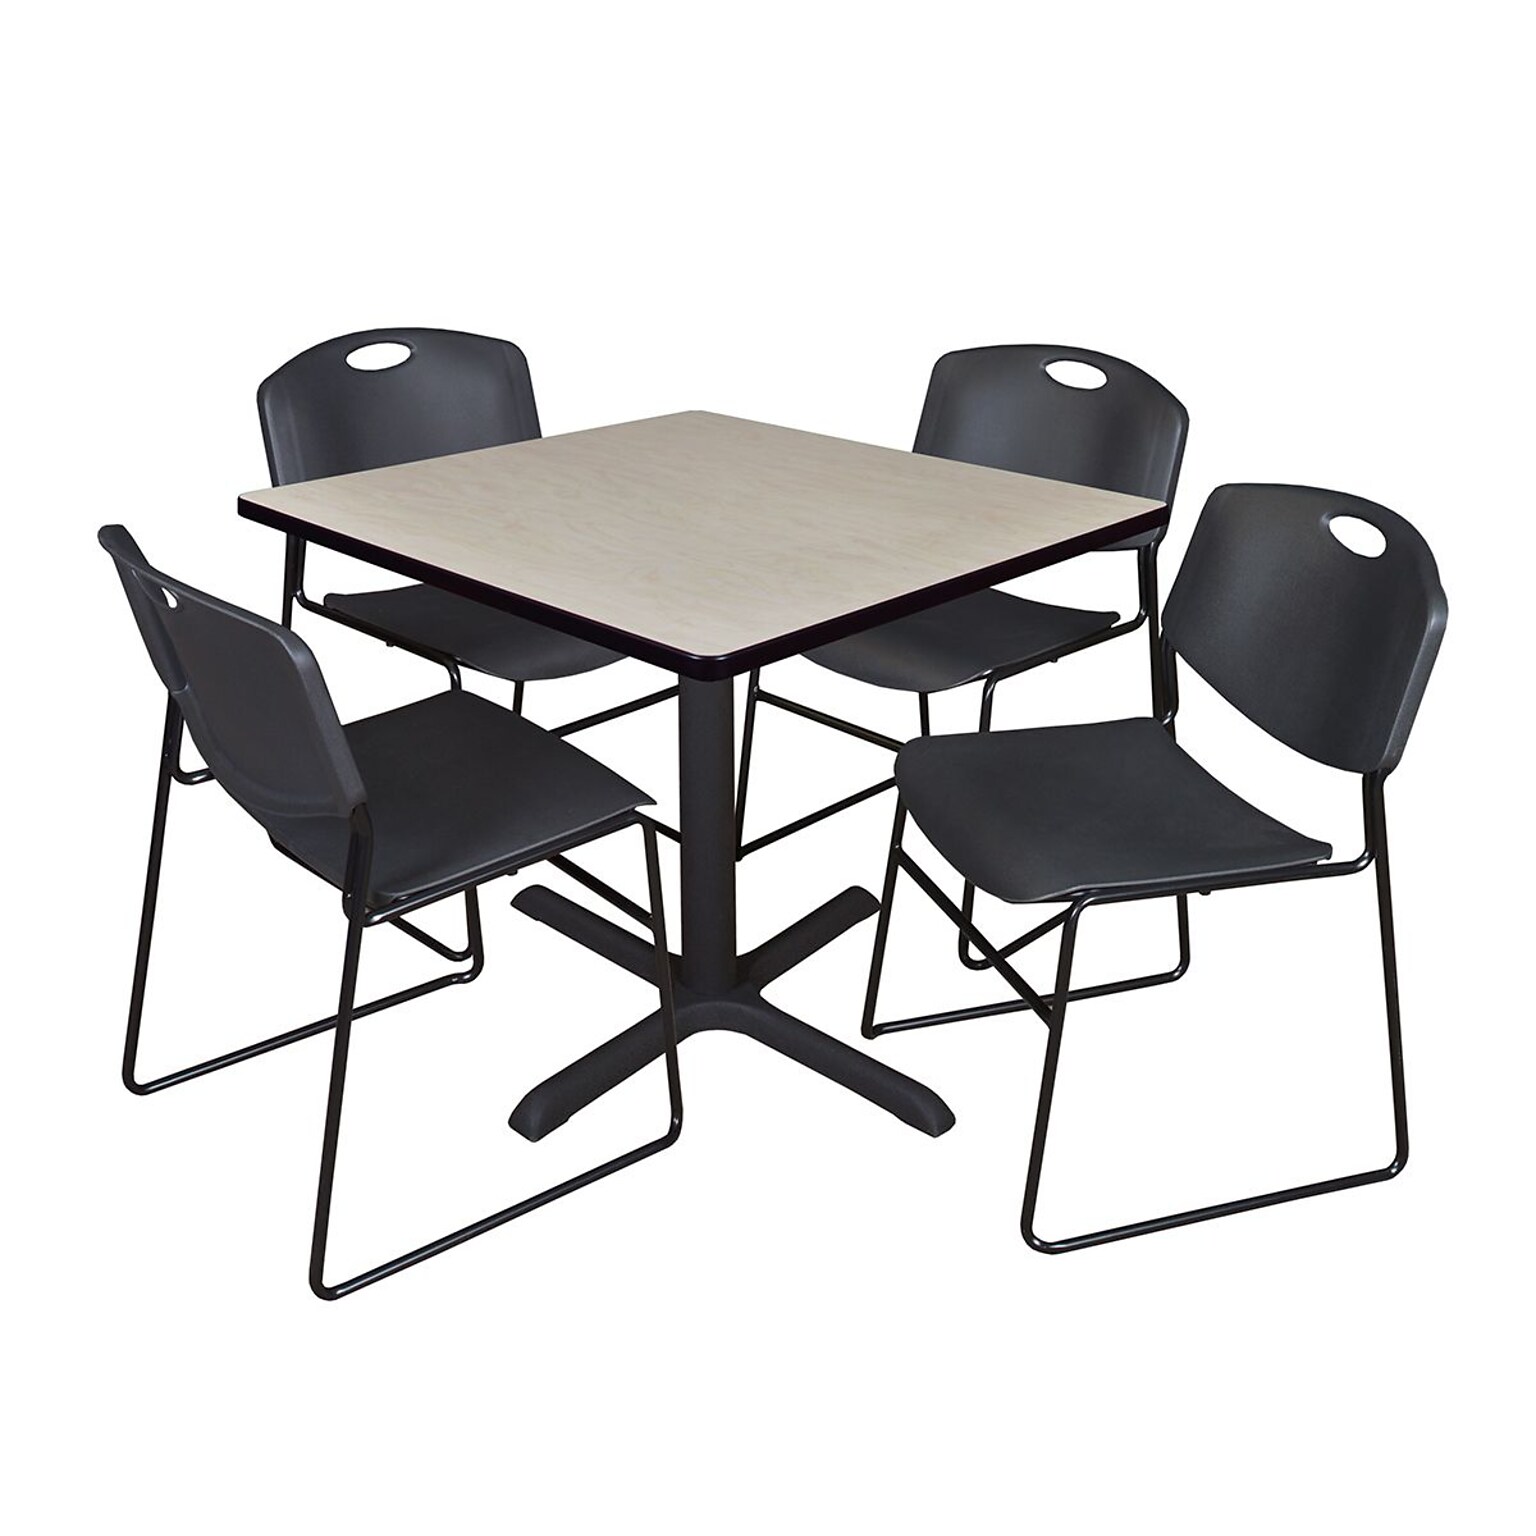 Regency 36-inch Square Laminate Table with 4 Chairs, Black (TB3636PL44BK)